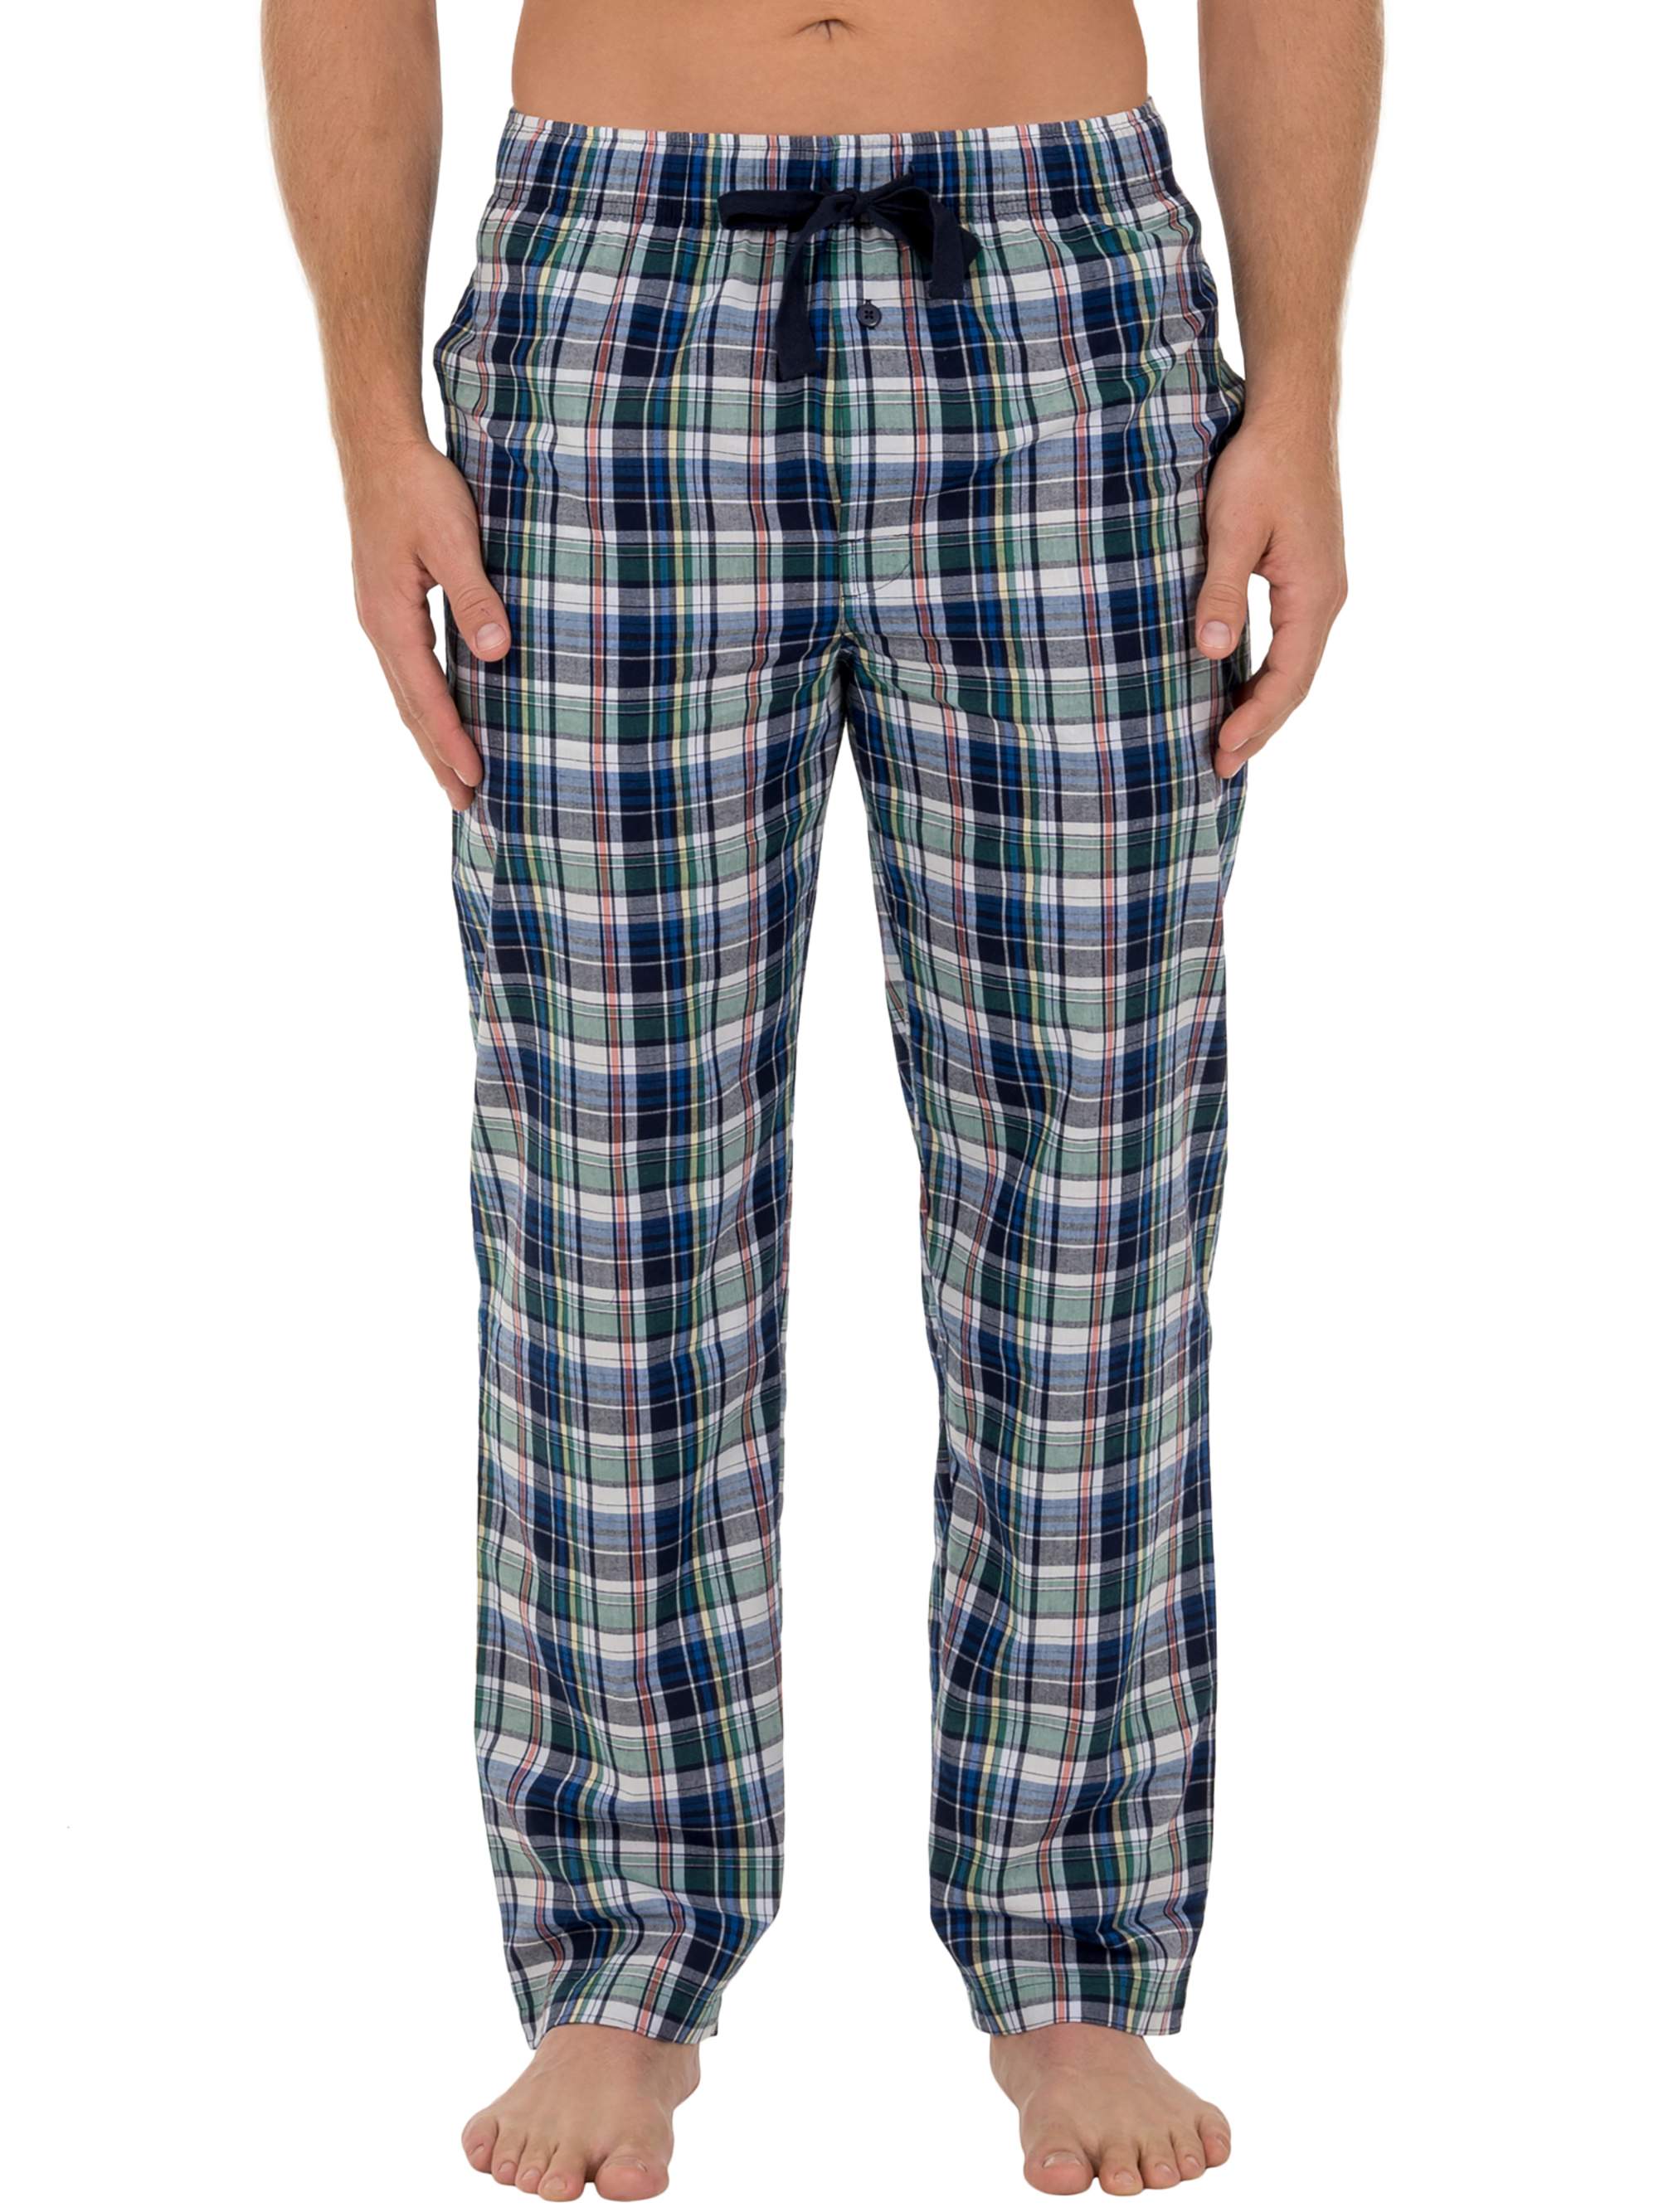 Fruit of the Loom Men's and Big Men's Microsanded Woven Plaid Pajama Pants, Sizes S-6XL & LT-3XLT - image 1 of 5